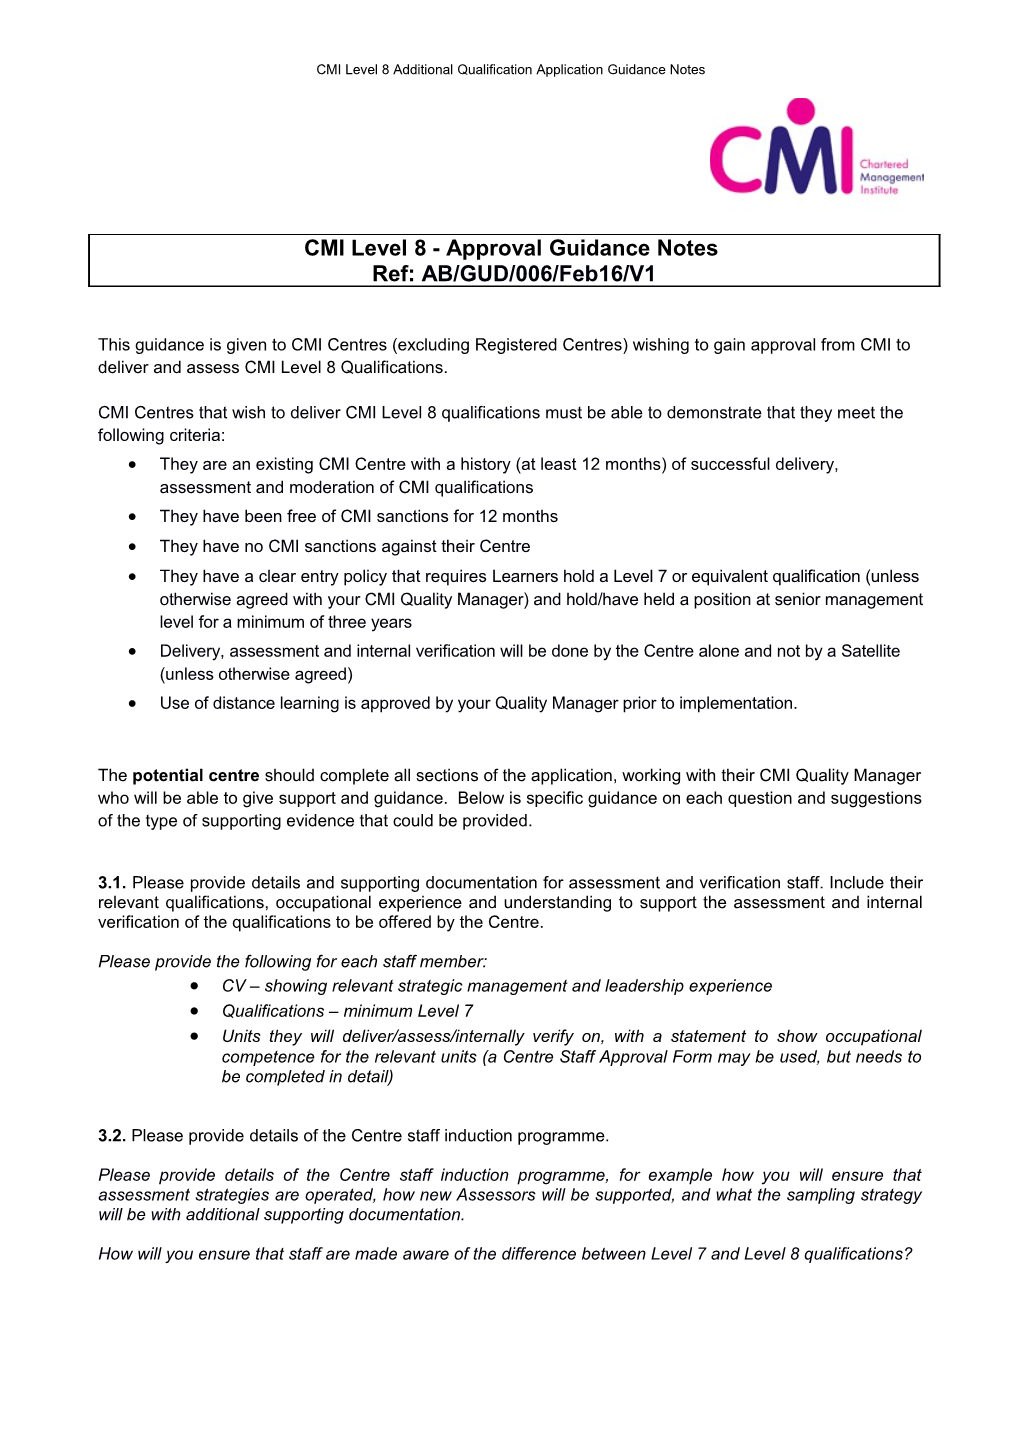 CMI Level 8 Additional Qualification Application Guidance Notes